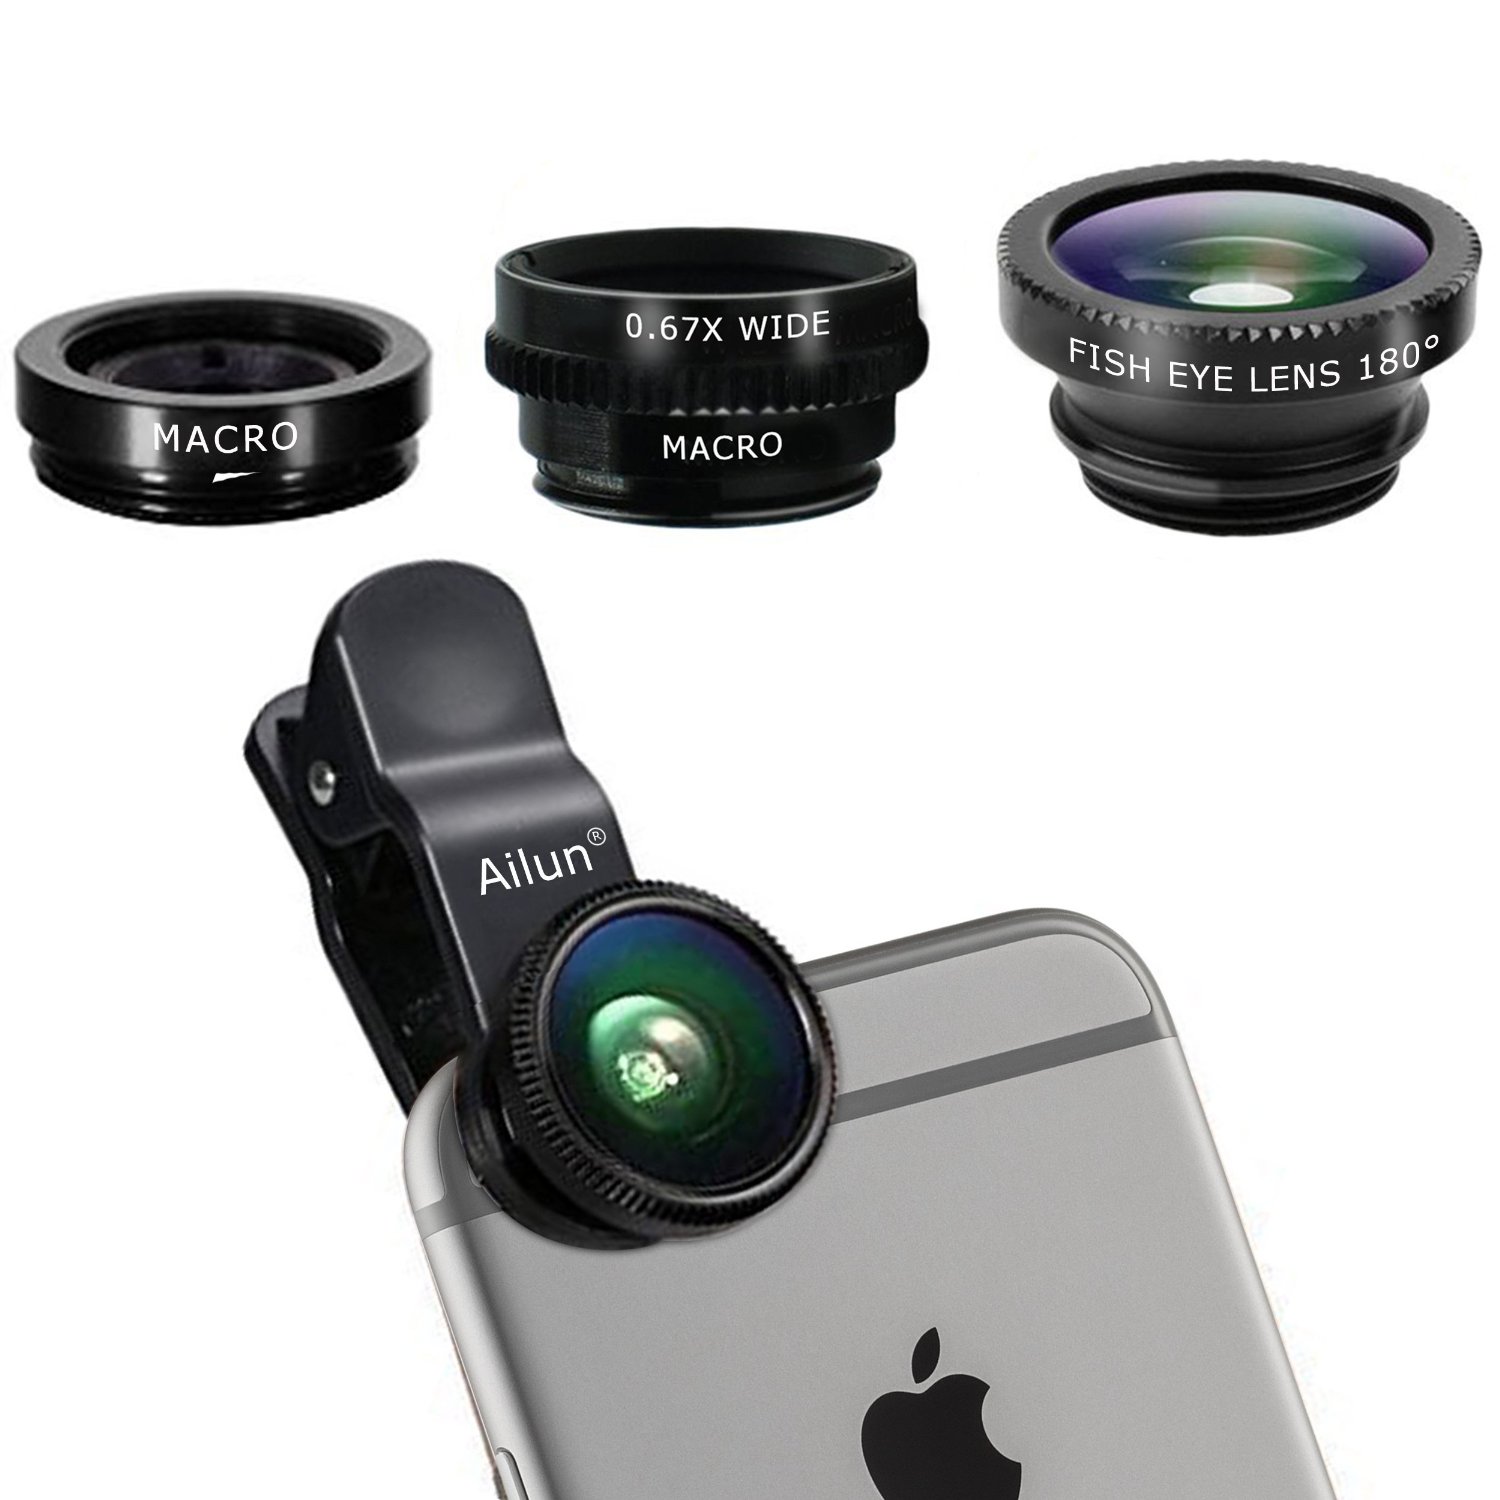 iPhone lens kits for under 10 iMore